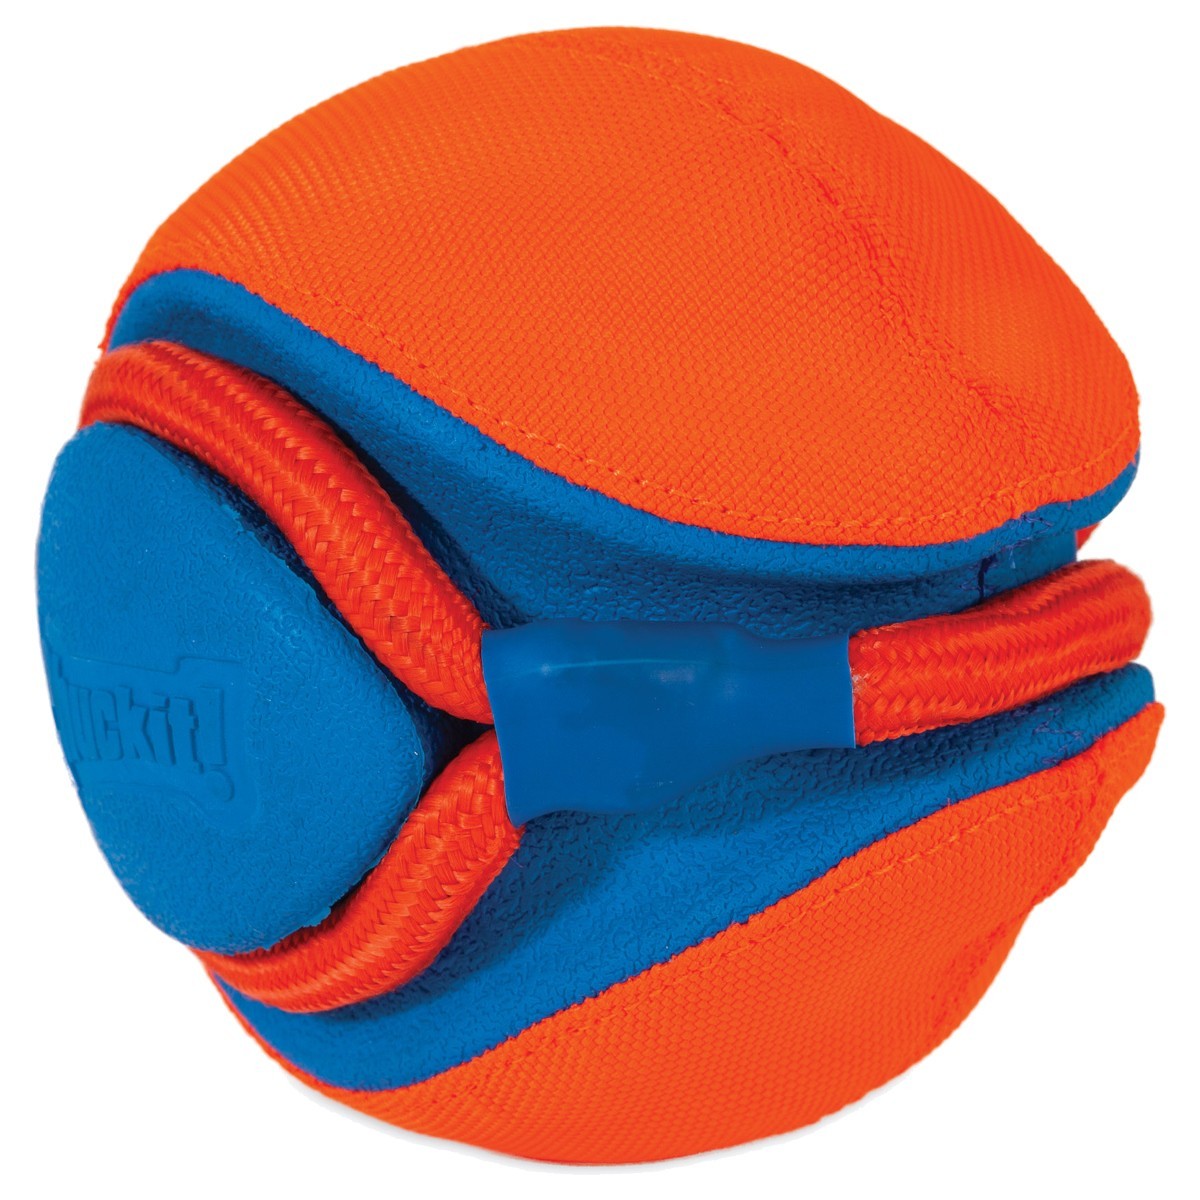 throw and fetch dog toys